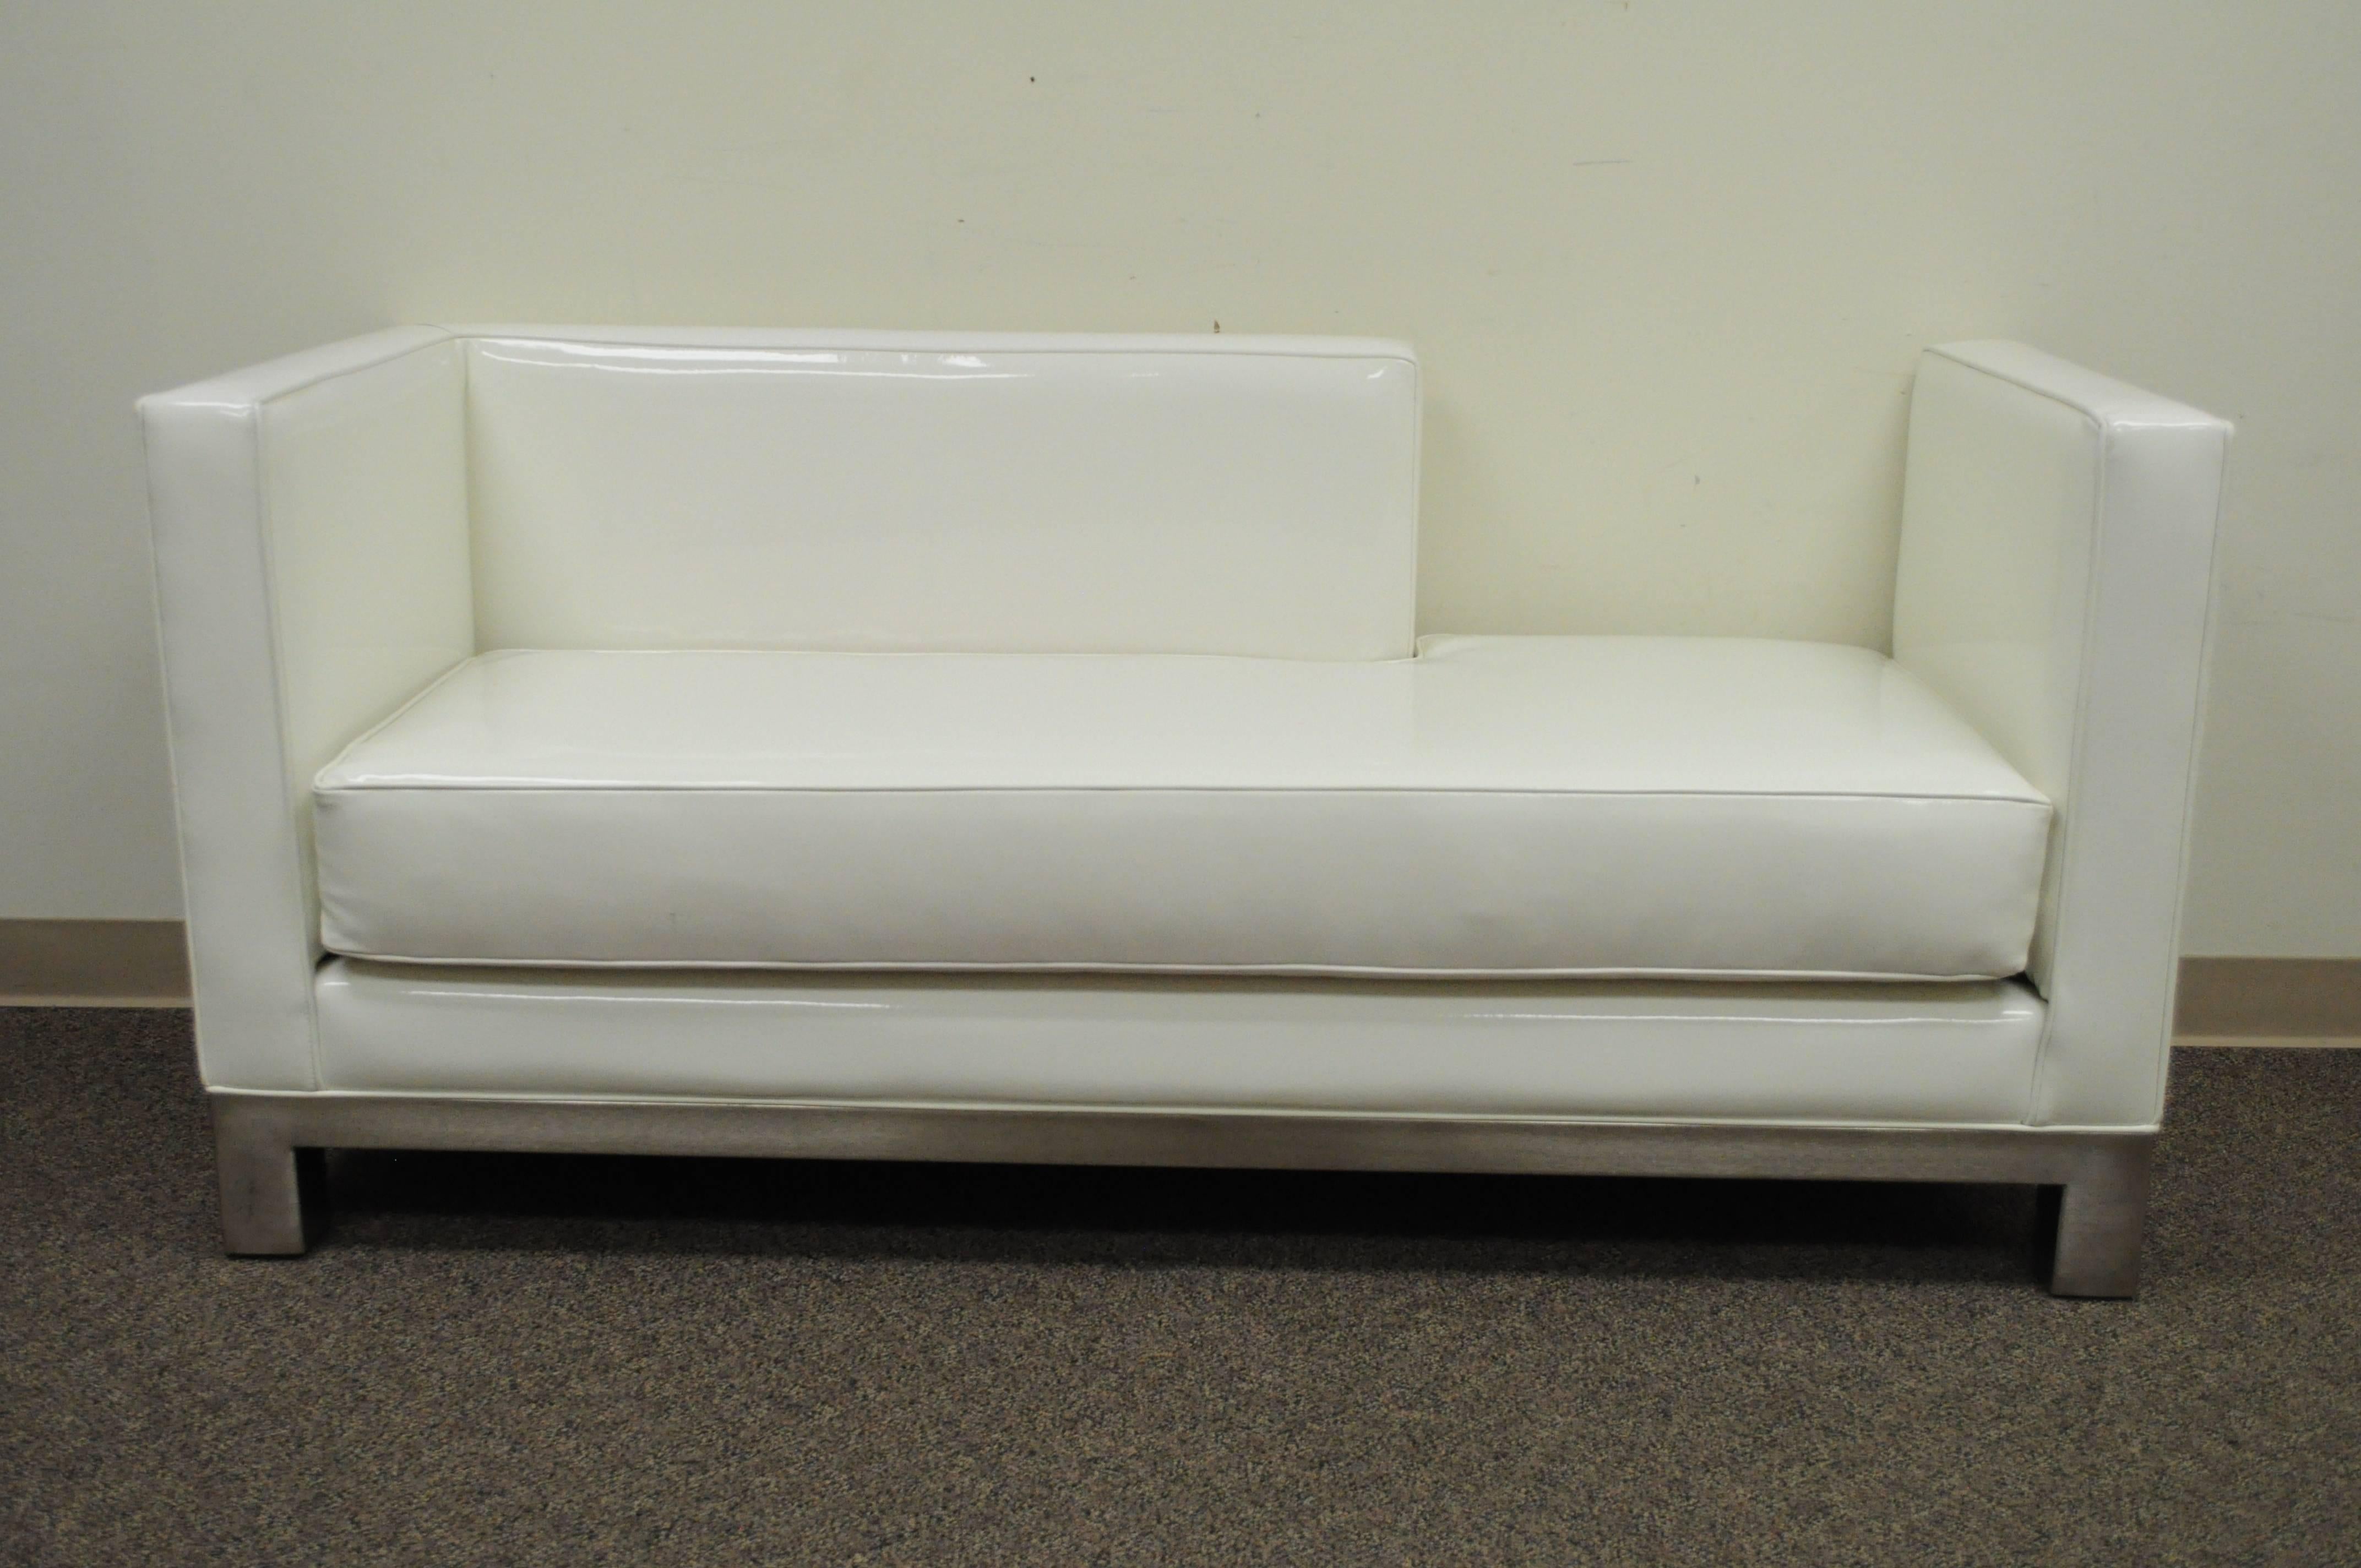 Unique pair of right and left white vinyl and brushed metal chaise lounges or sofas by J.A. Casillas. Items feature a sleek contemporary modern design raised on brushed metal bases. Price is for the pair.